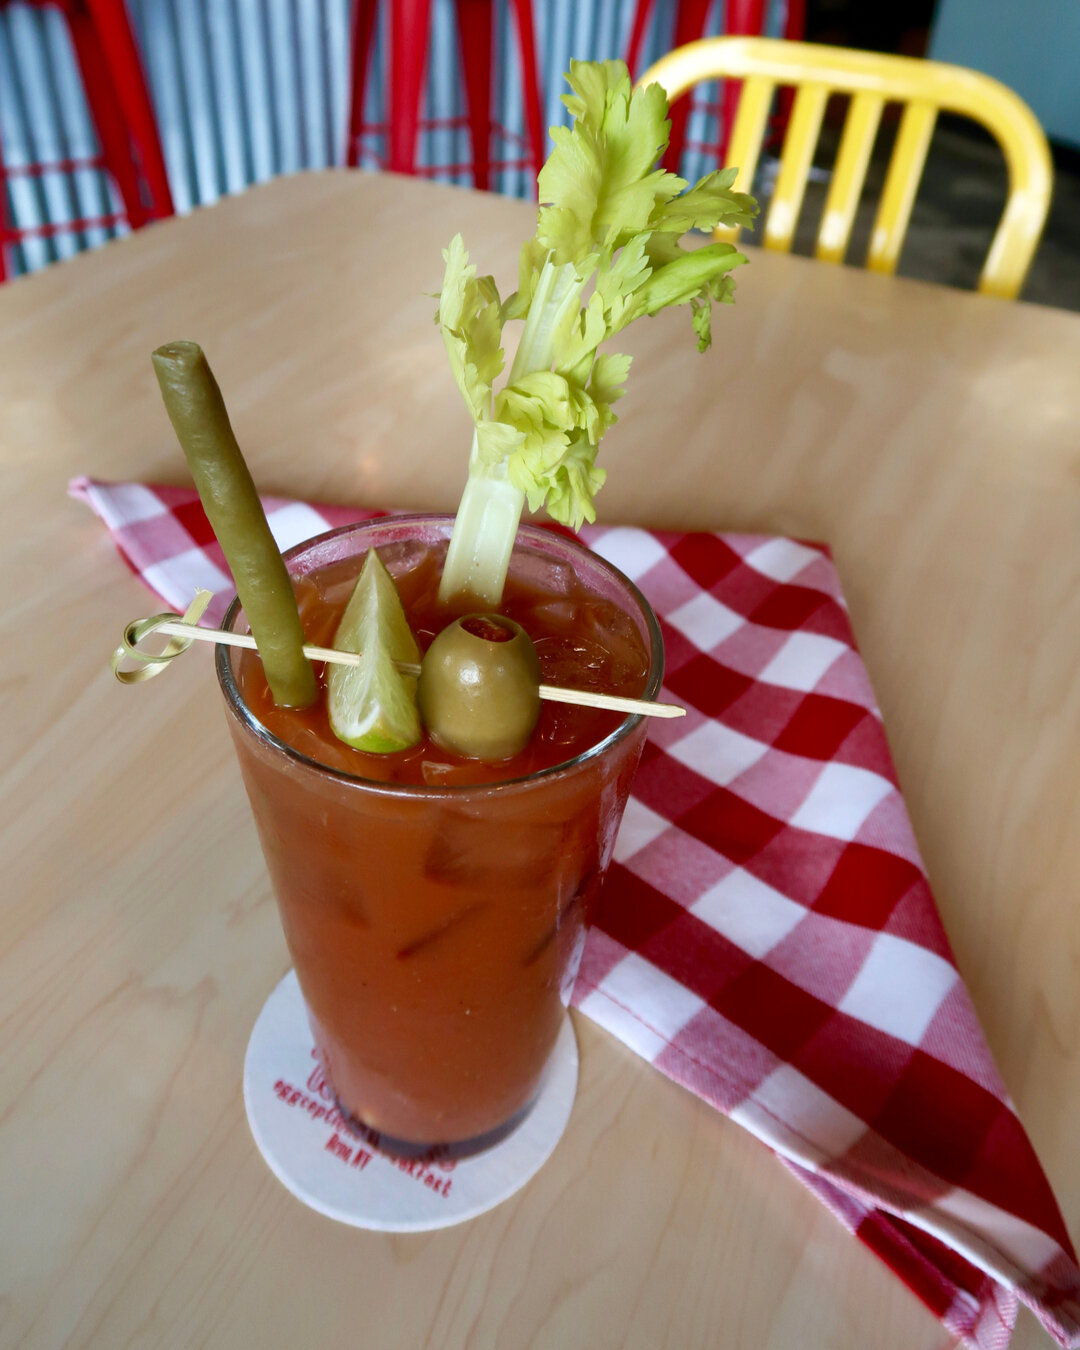 Sunday, Bloody Sunday! Something about a good Sunday Morning Brunch that screams Bloody Marys. Come in and try our Award Winning recipe today!